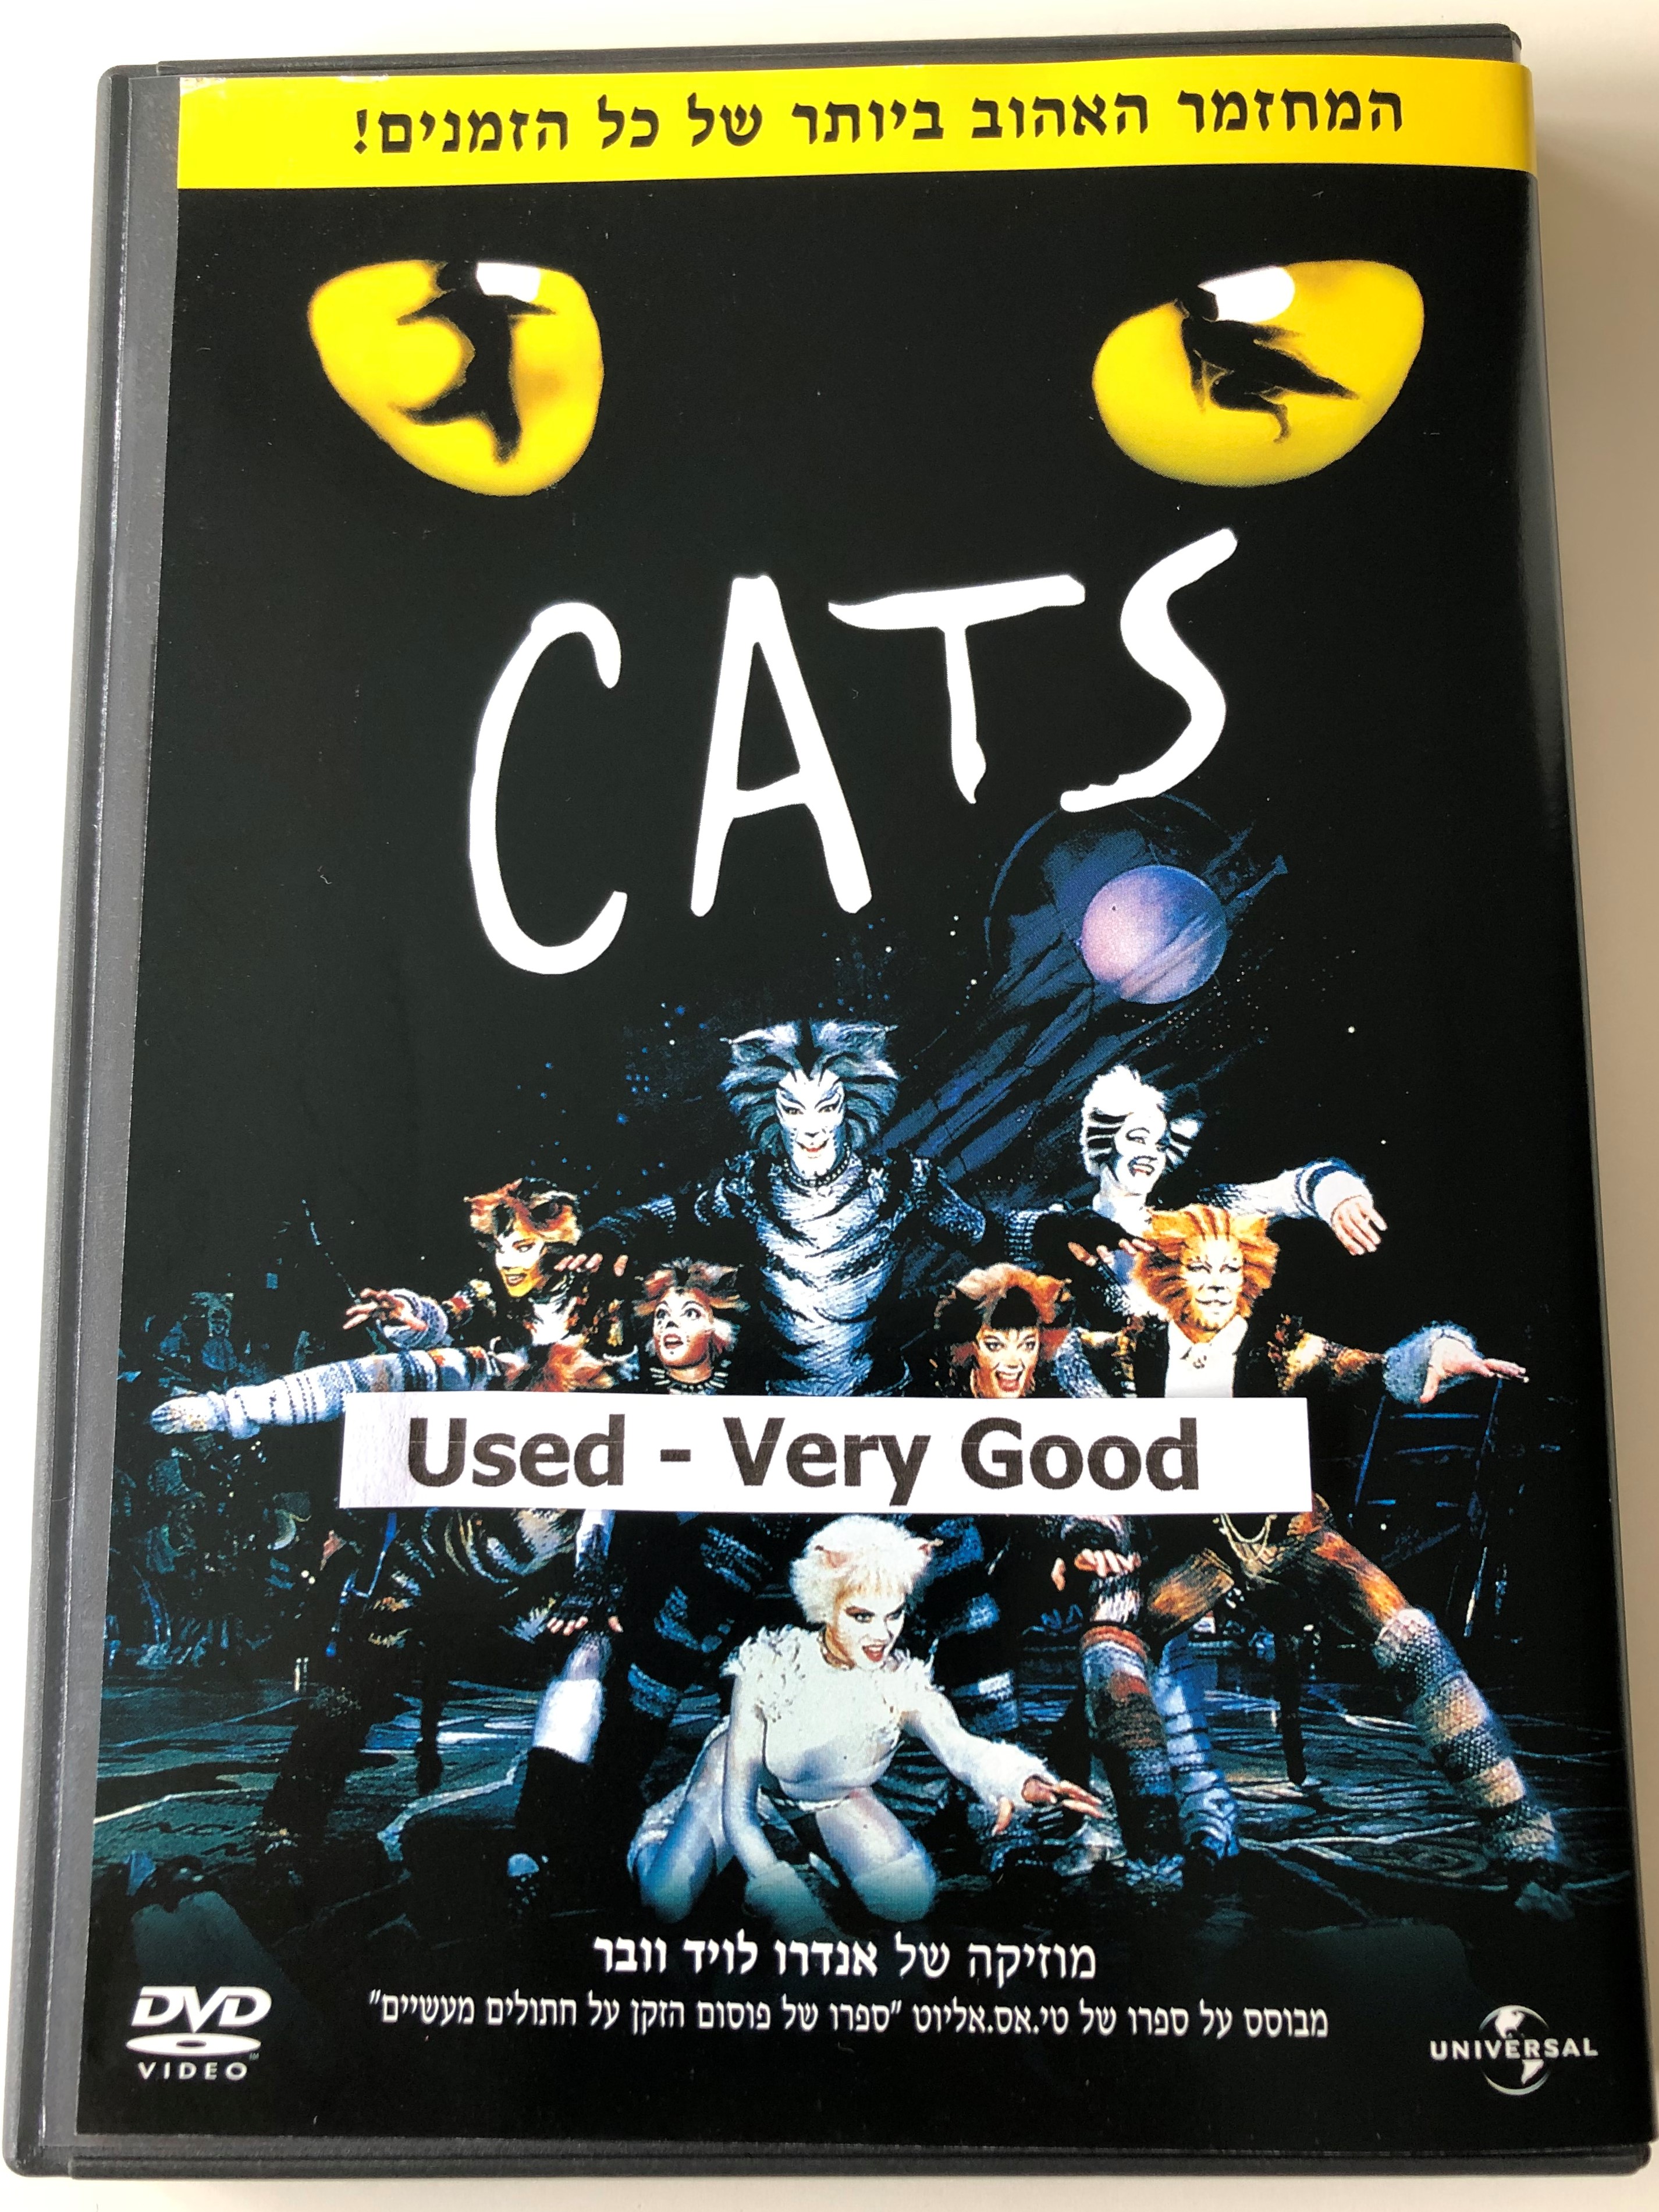 Cats DVD 1998 Hebrew edition / Directed by David Mallet / Starring: Elaine  Paige, John Mills, Ken Page / Music by Andrew Lloyd Webber -  bibleinmylanguage